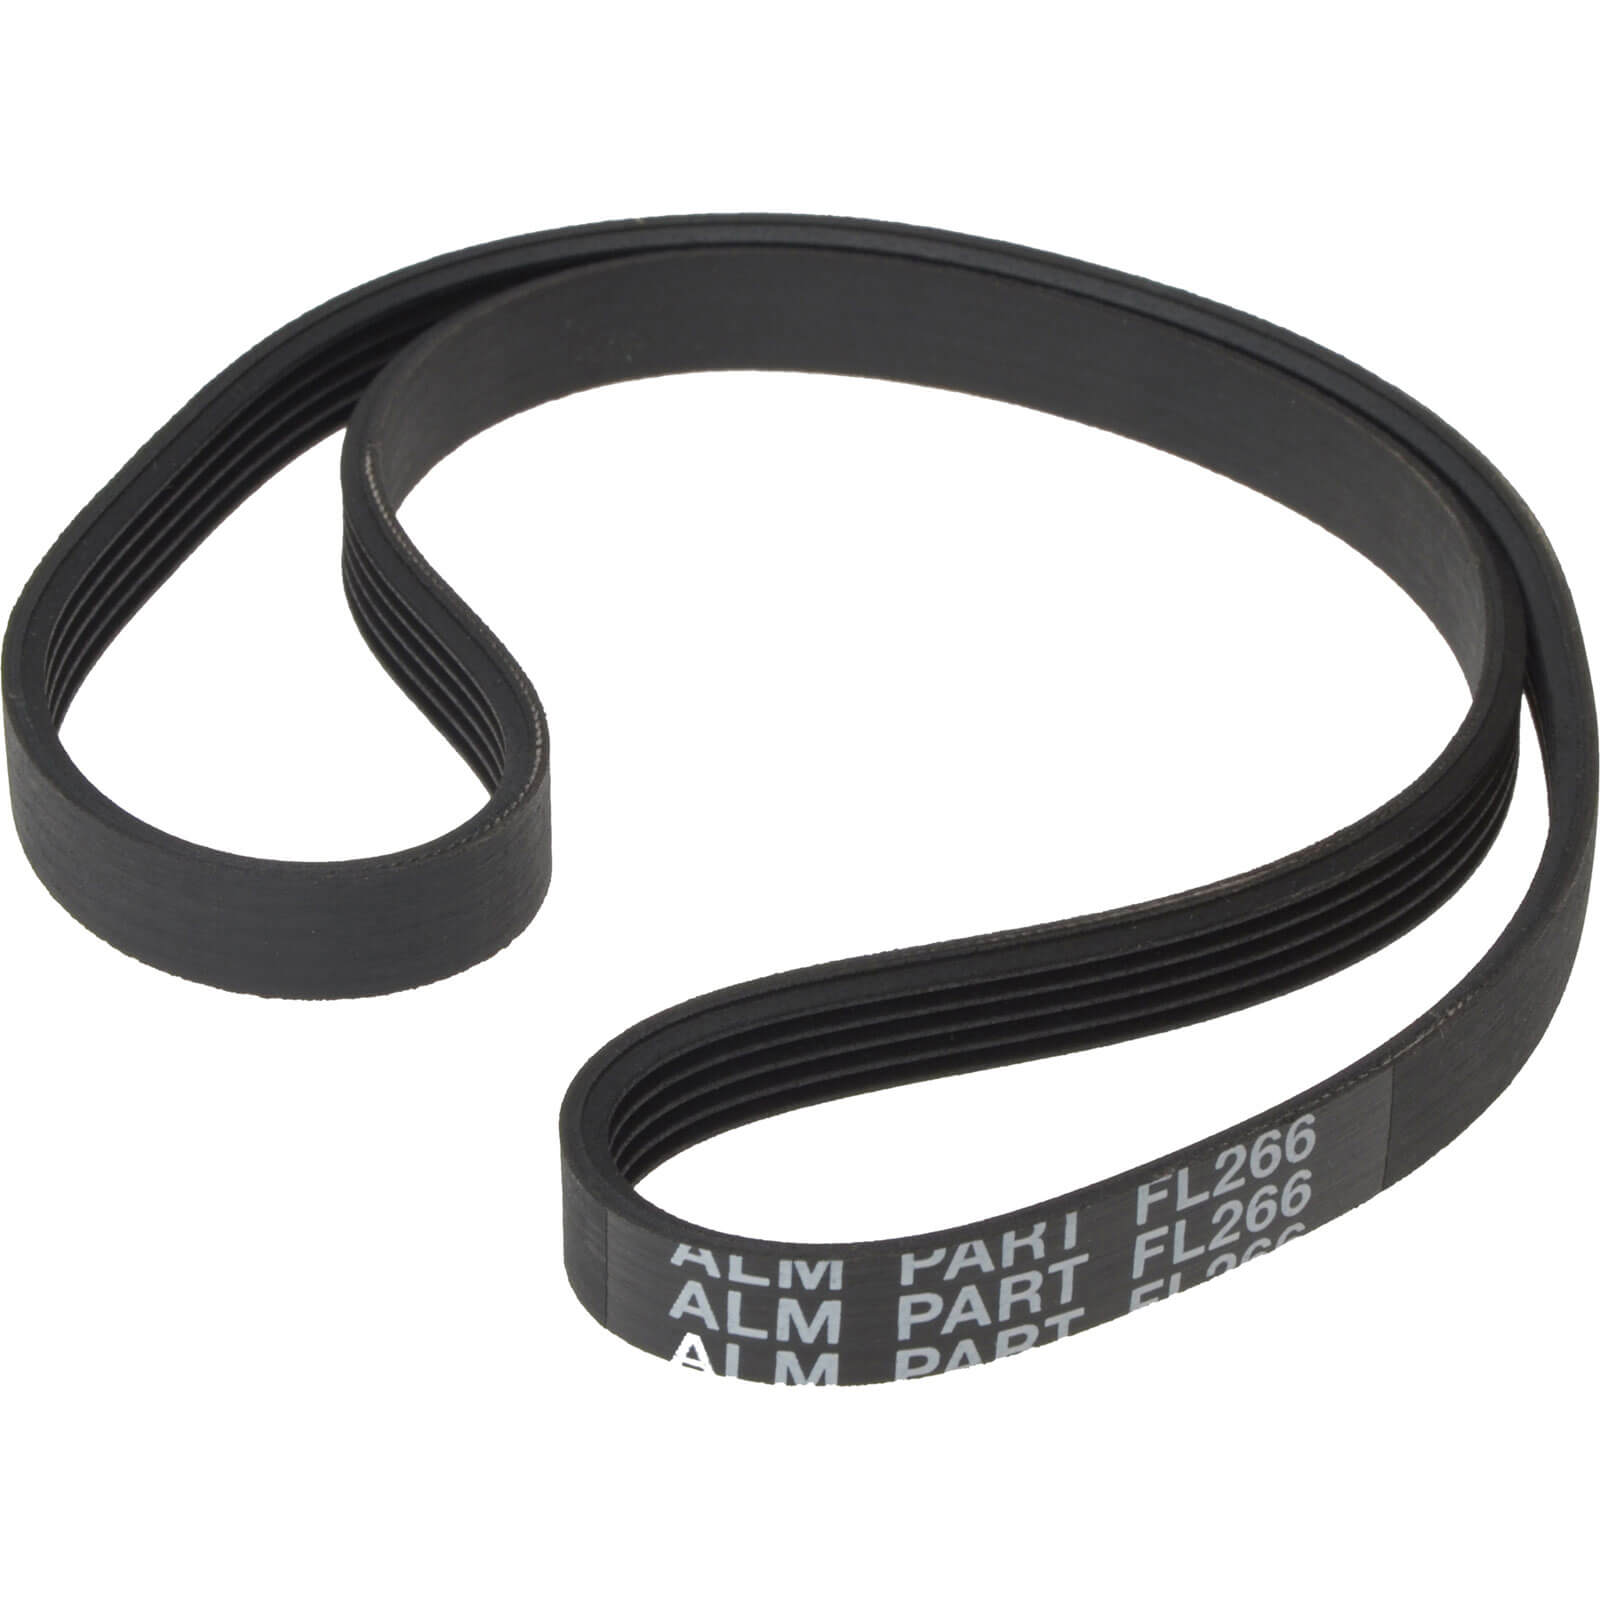 Photo of Alm Fl266 Poly V Belt For Flymo Turbo Compact